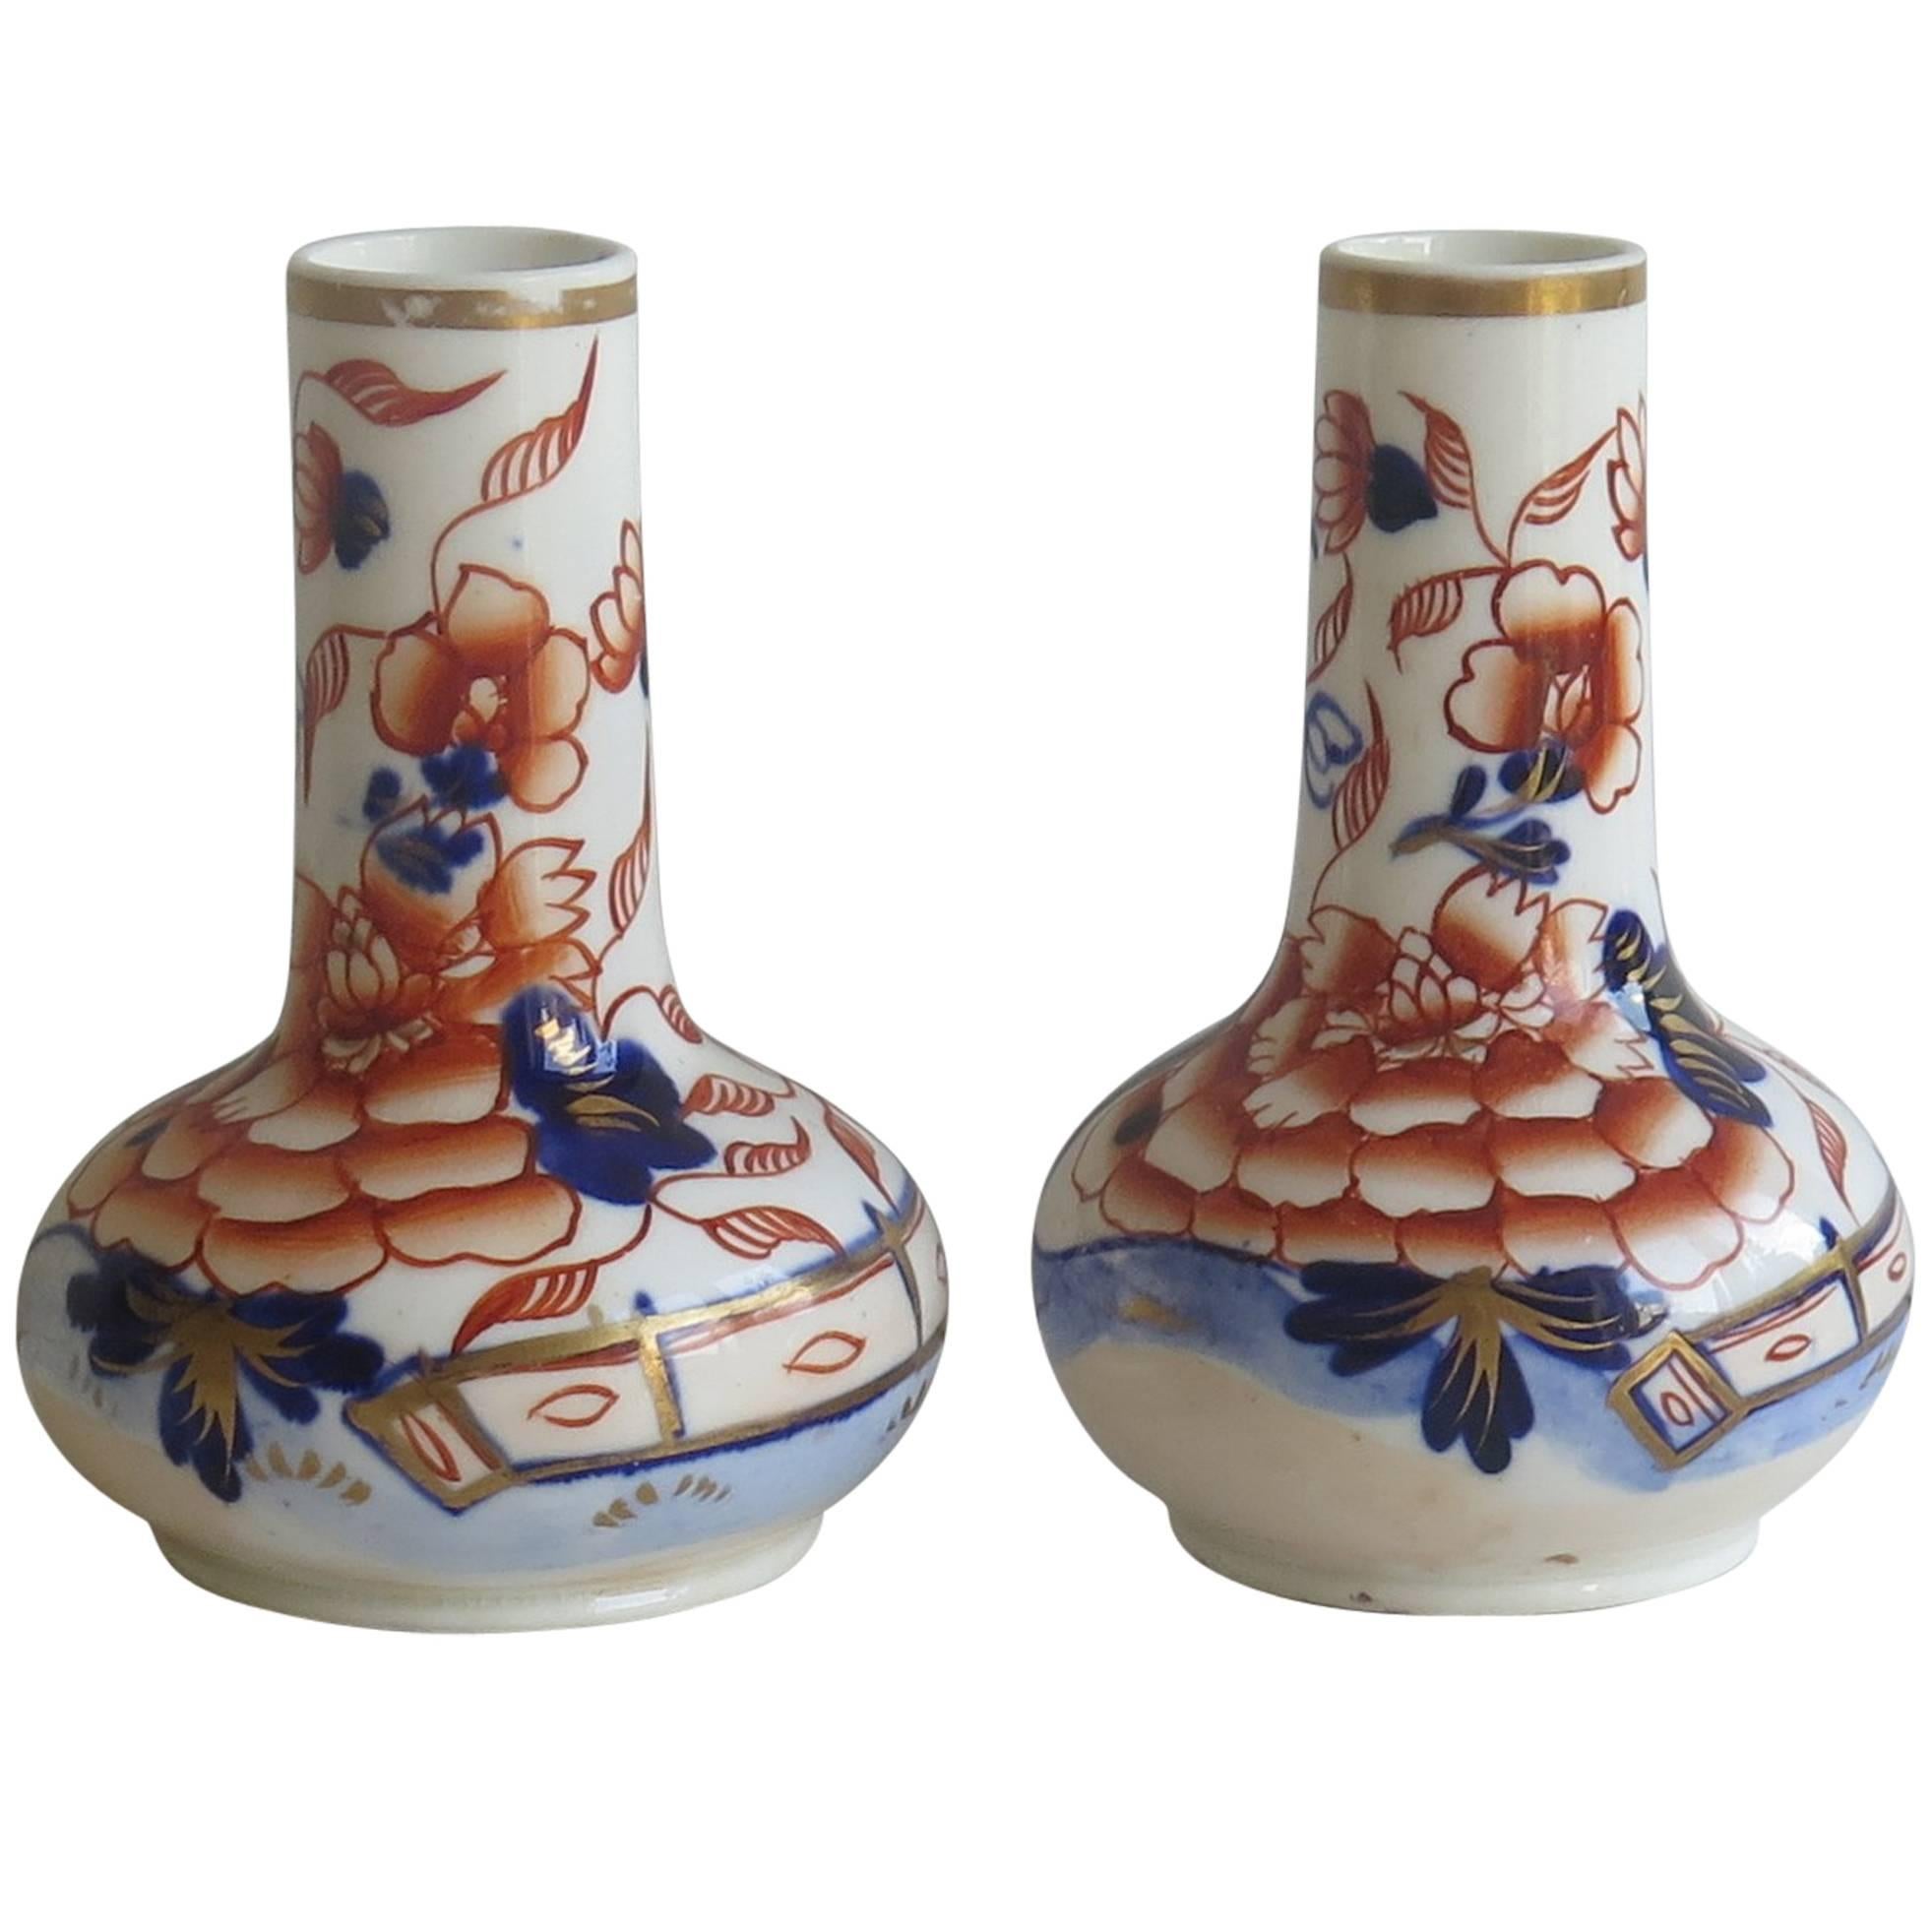 Early Pair of Mason's Scent or Perfume Bottles in Fence Japan pattern, Ca 1825